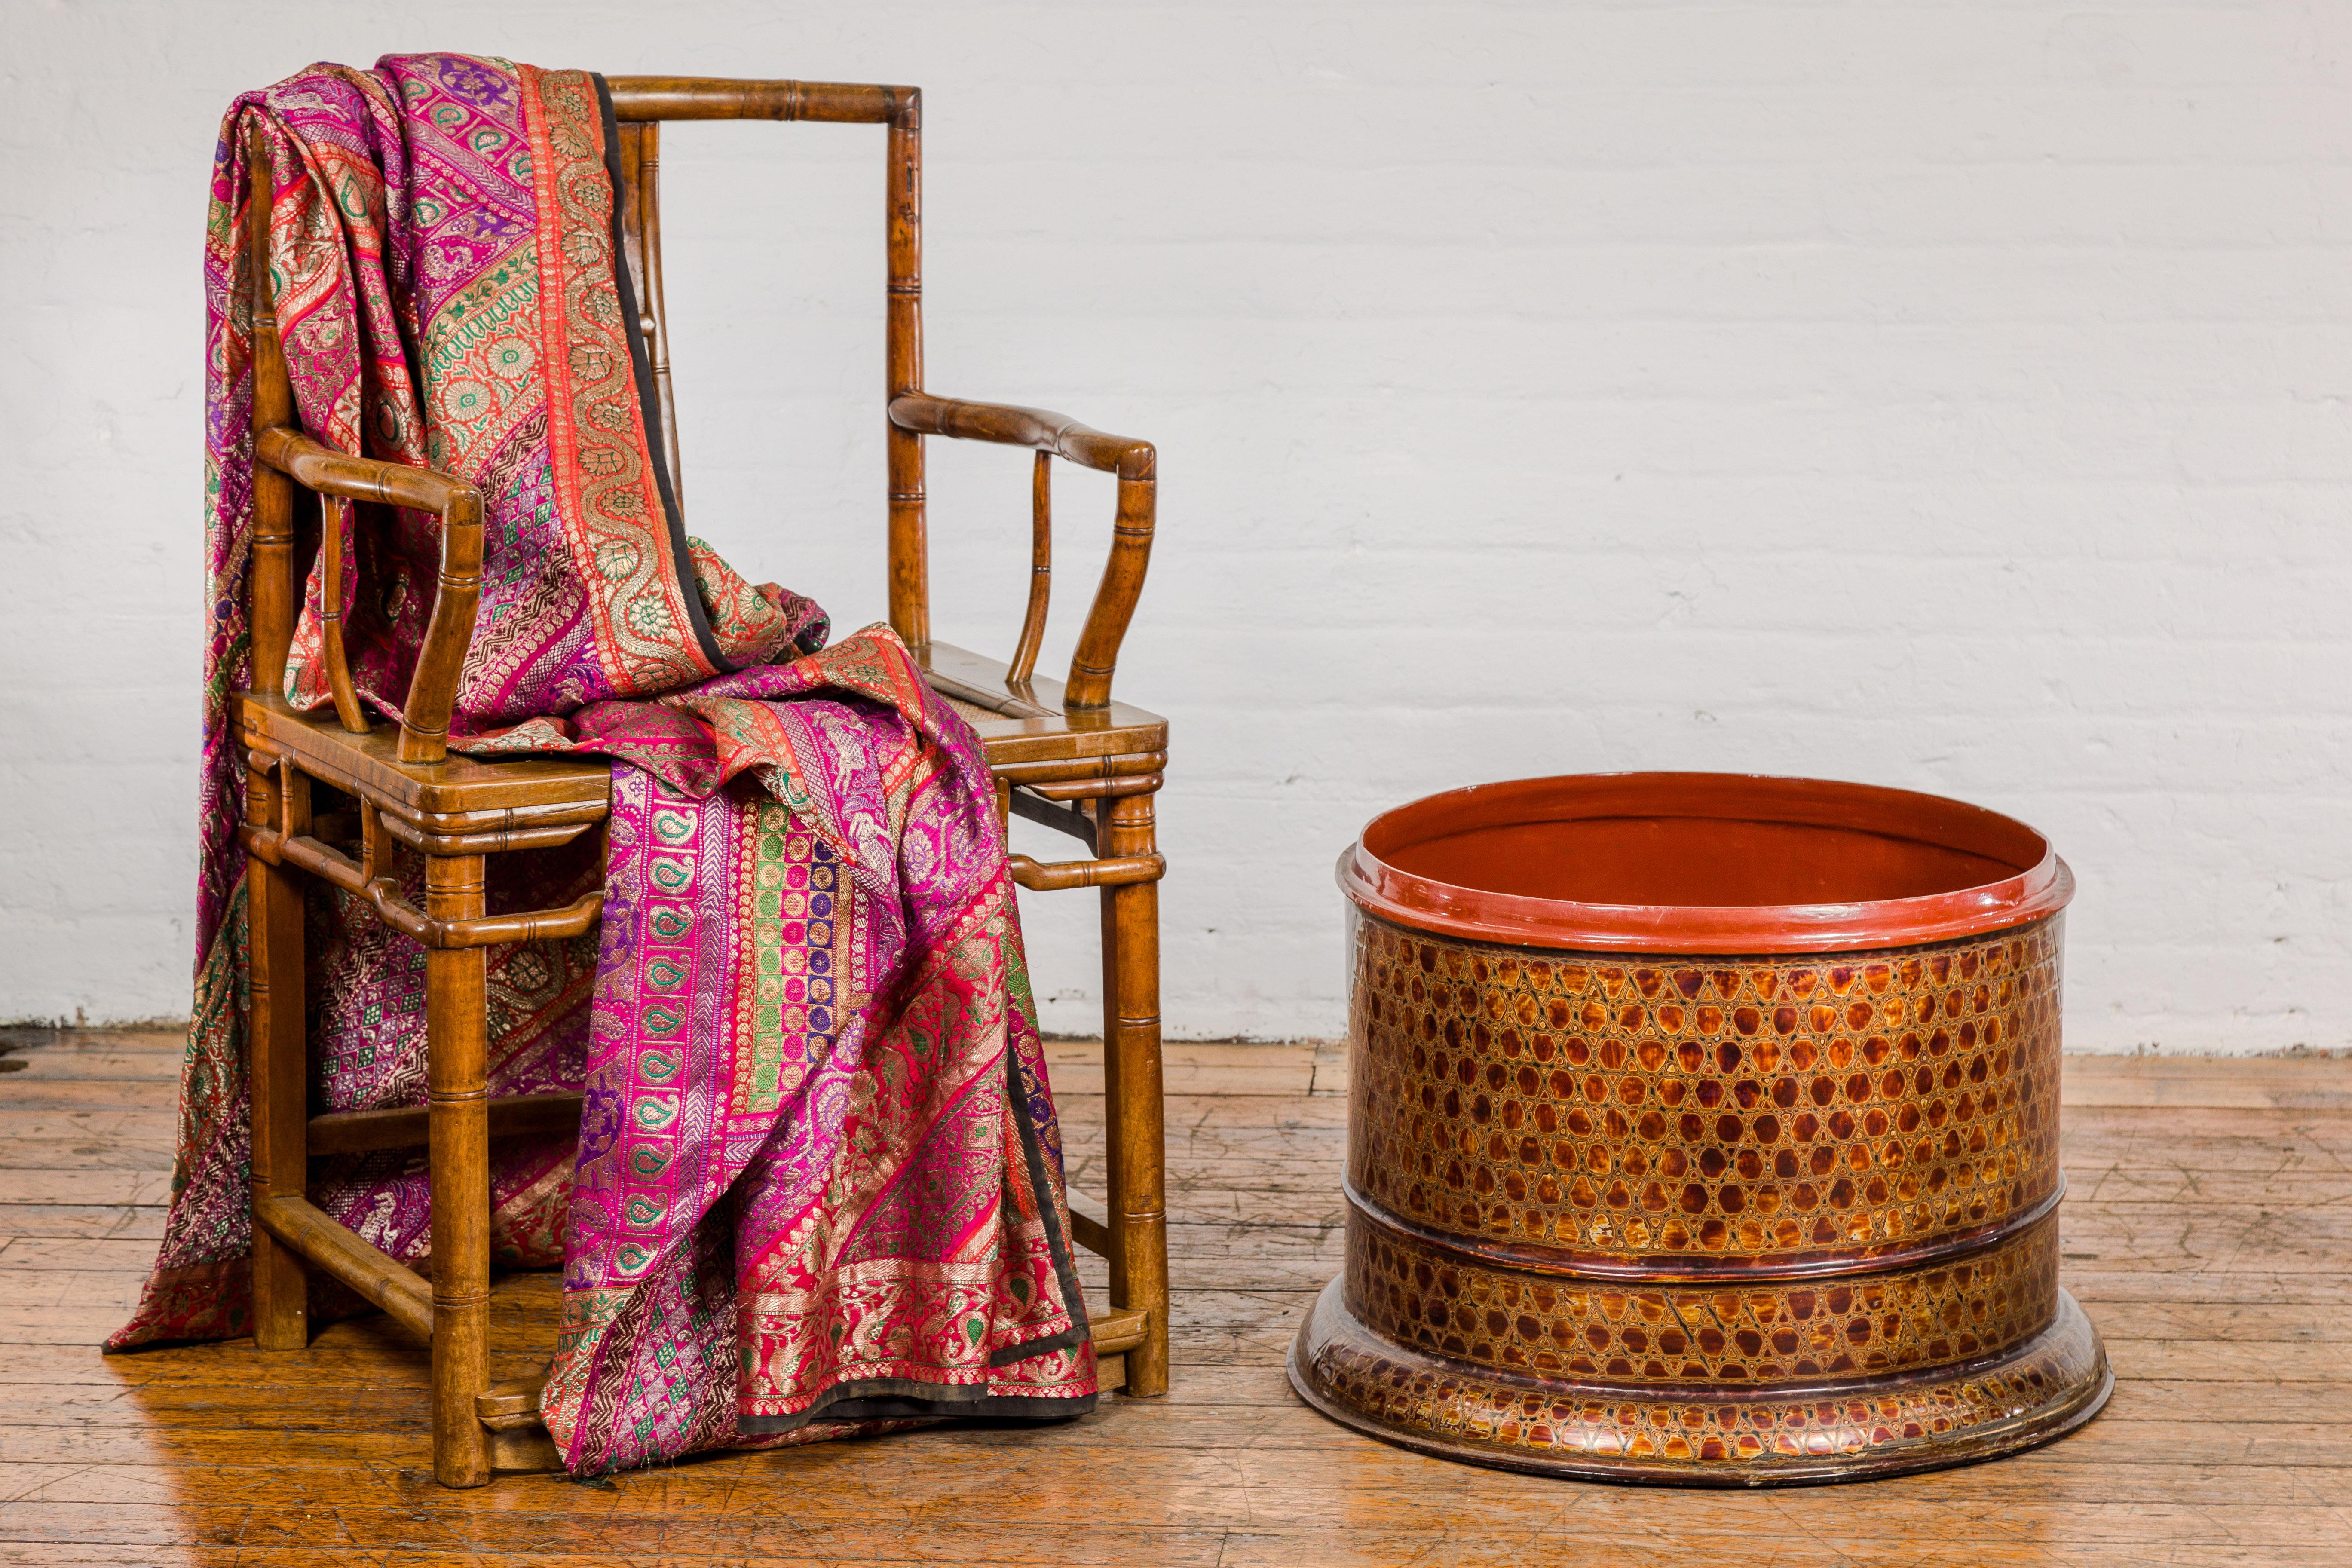 A round vintage lacquered storage bin from the mid-20th century with snake skin patterns. Immerse your home in the rich traditions and captivating beauty of Asian craftsmanship with this exquisite vintage Negora lacquer storage bin from the mid-20th